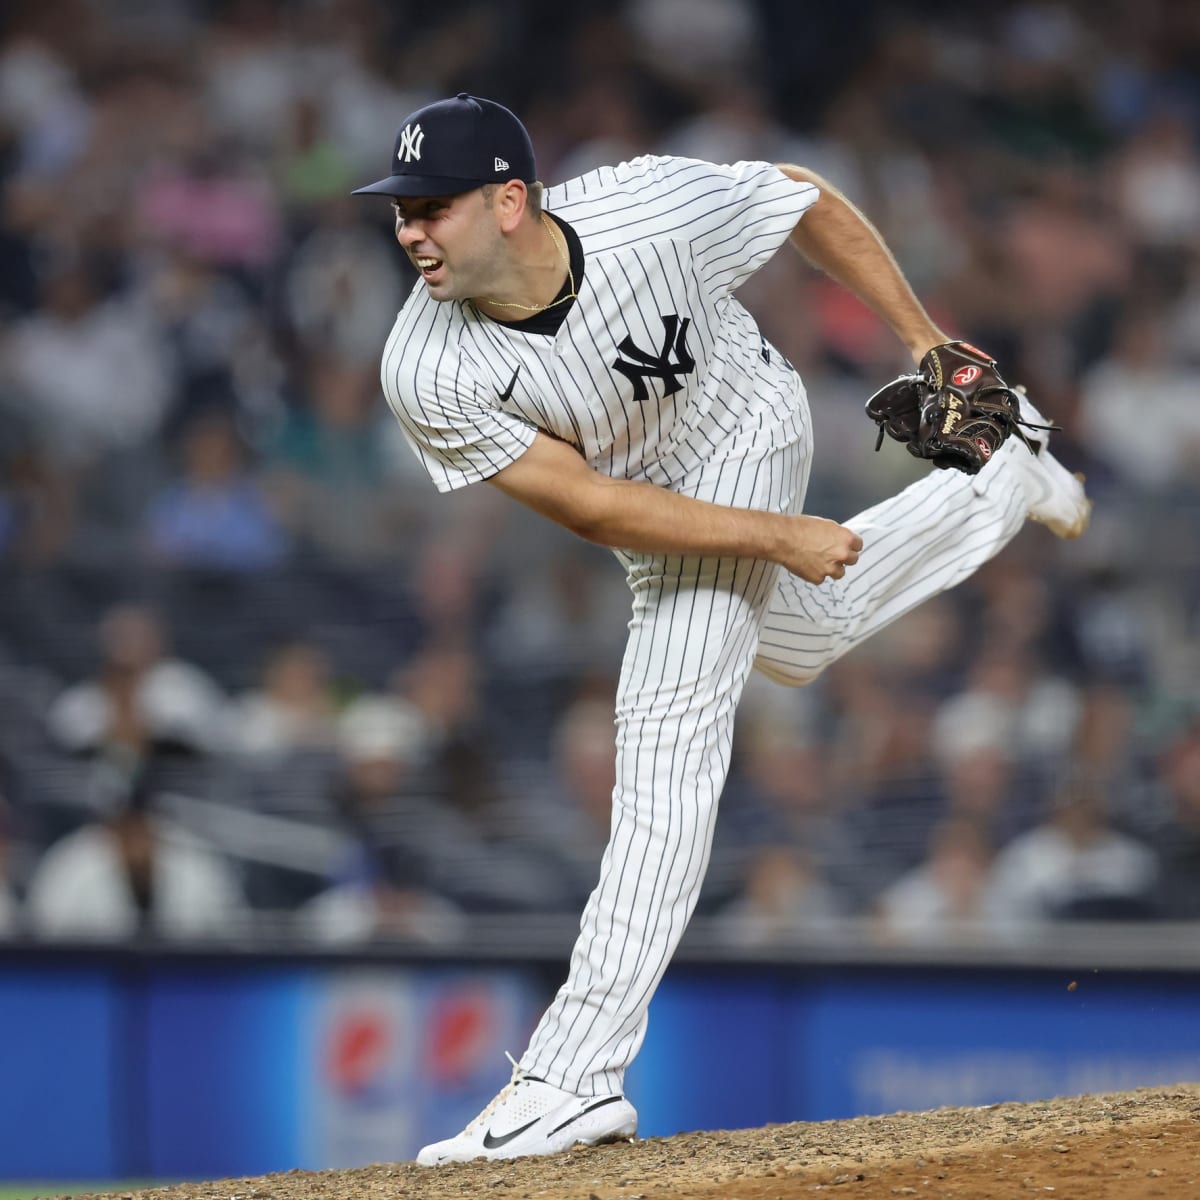 Yankees' Lou Trivino has UCL injury rehab halted after setback